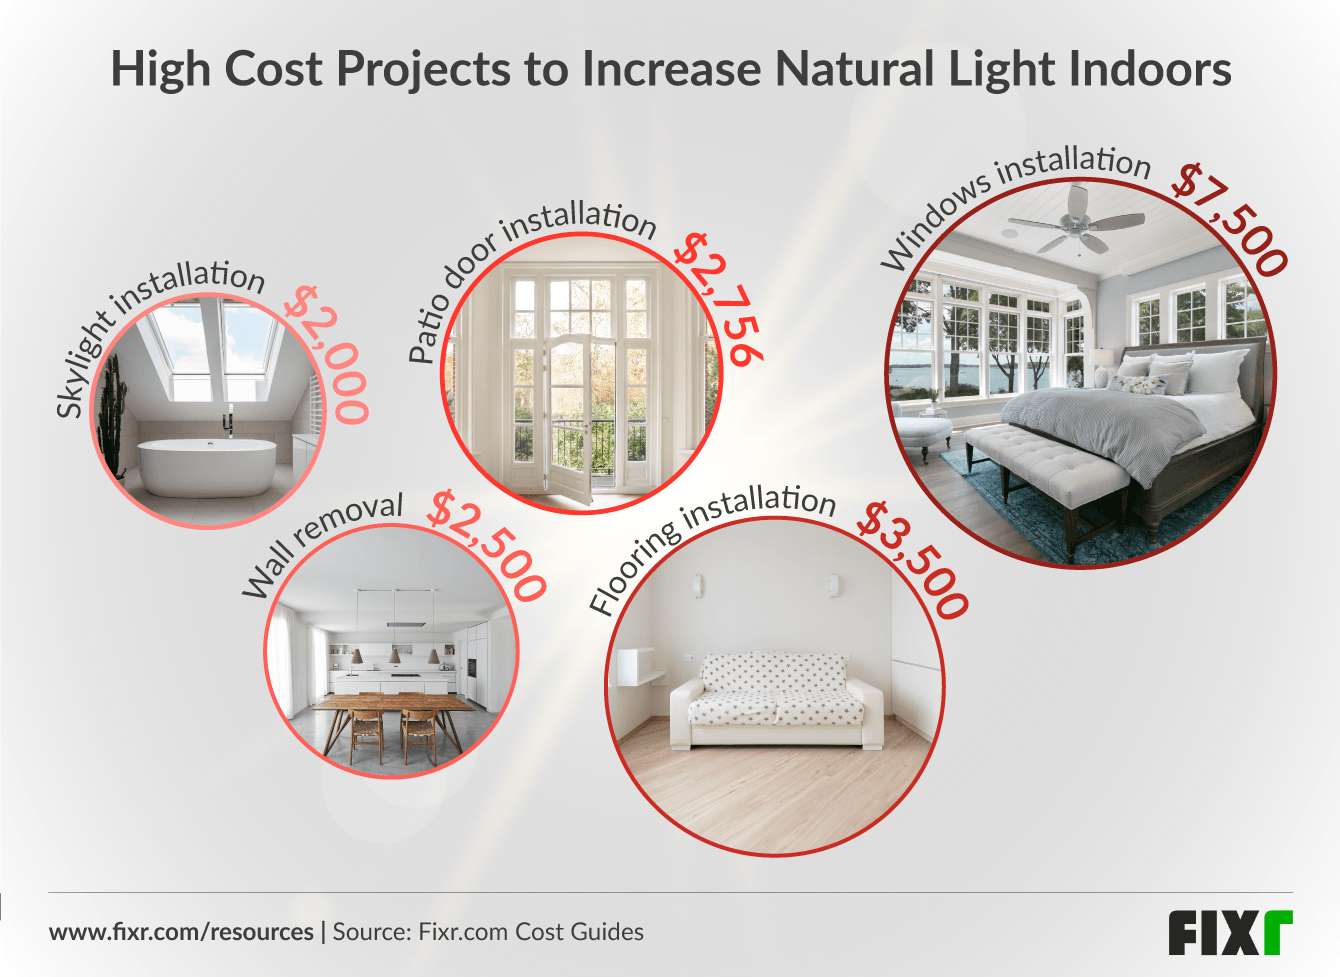 high cost home improvements for natural lighting